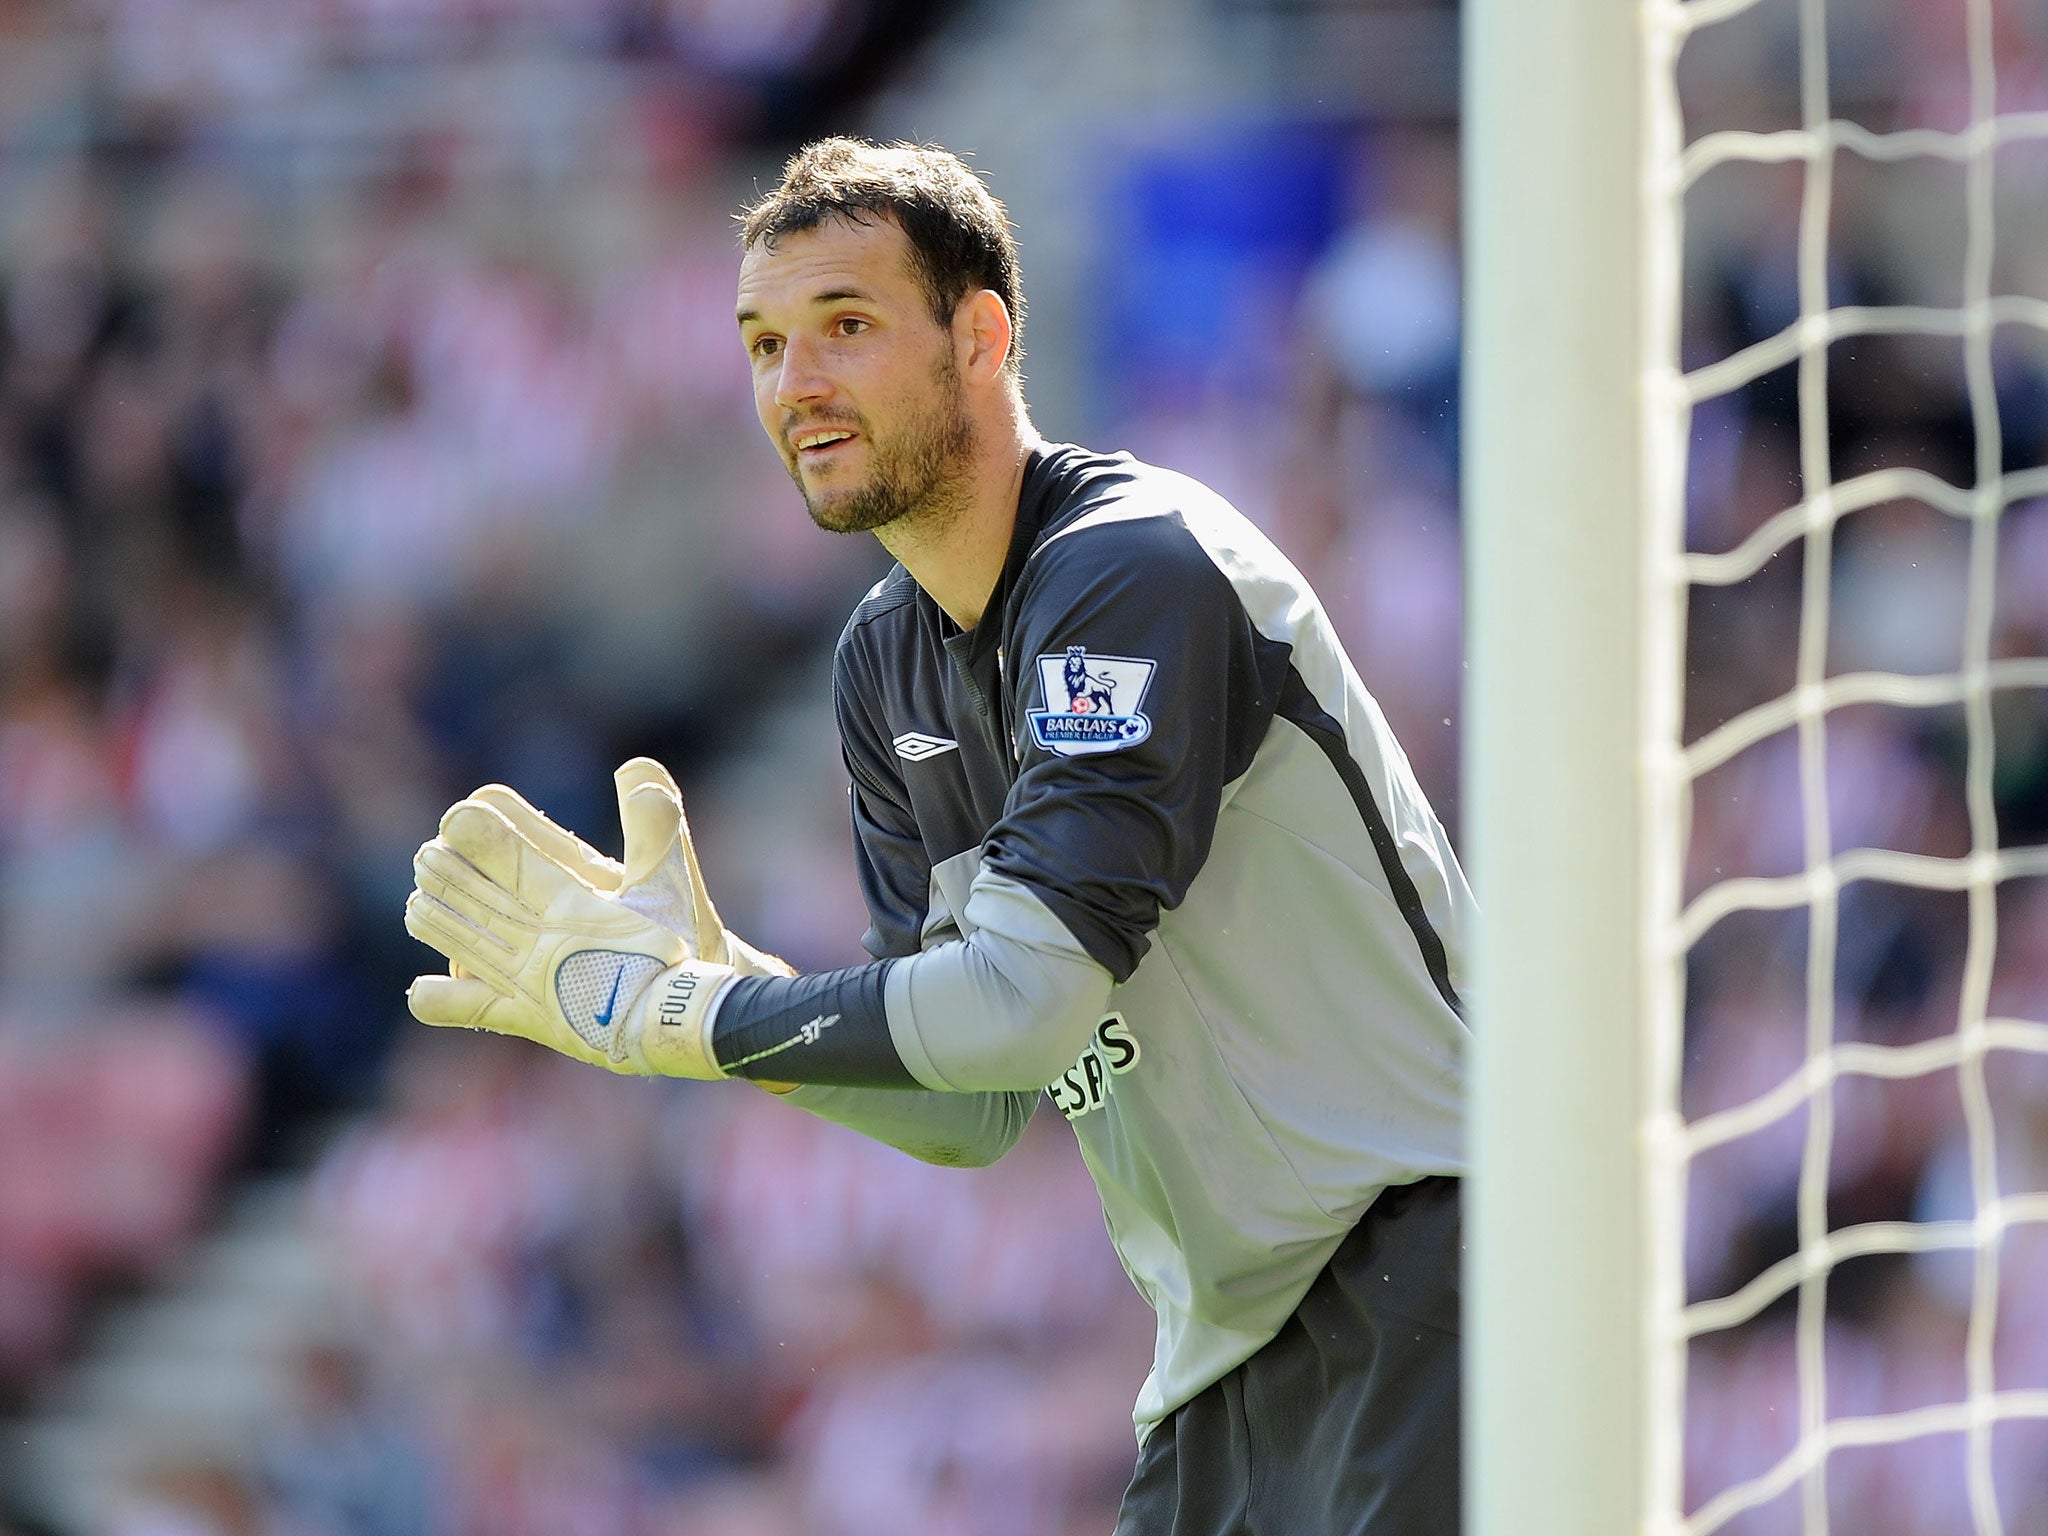 Marton Fulop during his time at Sunderland in 2009